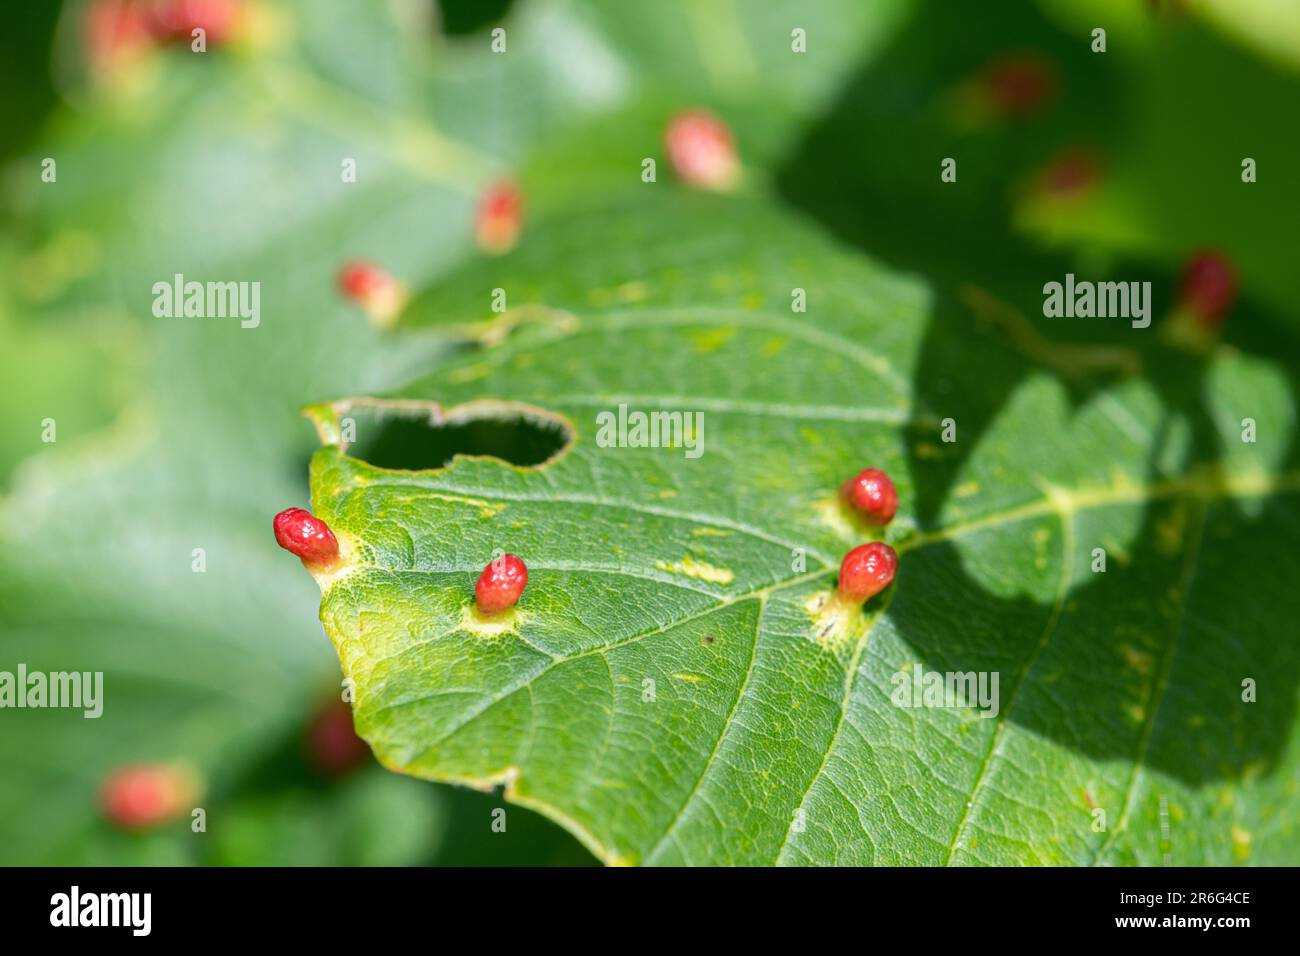 Maple bladder galls, red rounded swellings on the upperside of maple tree leaves caused by the mite Vasates quadripedes Stock Photo